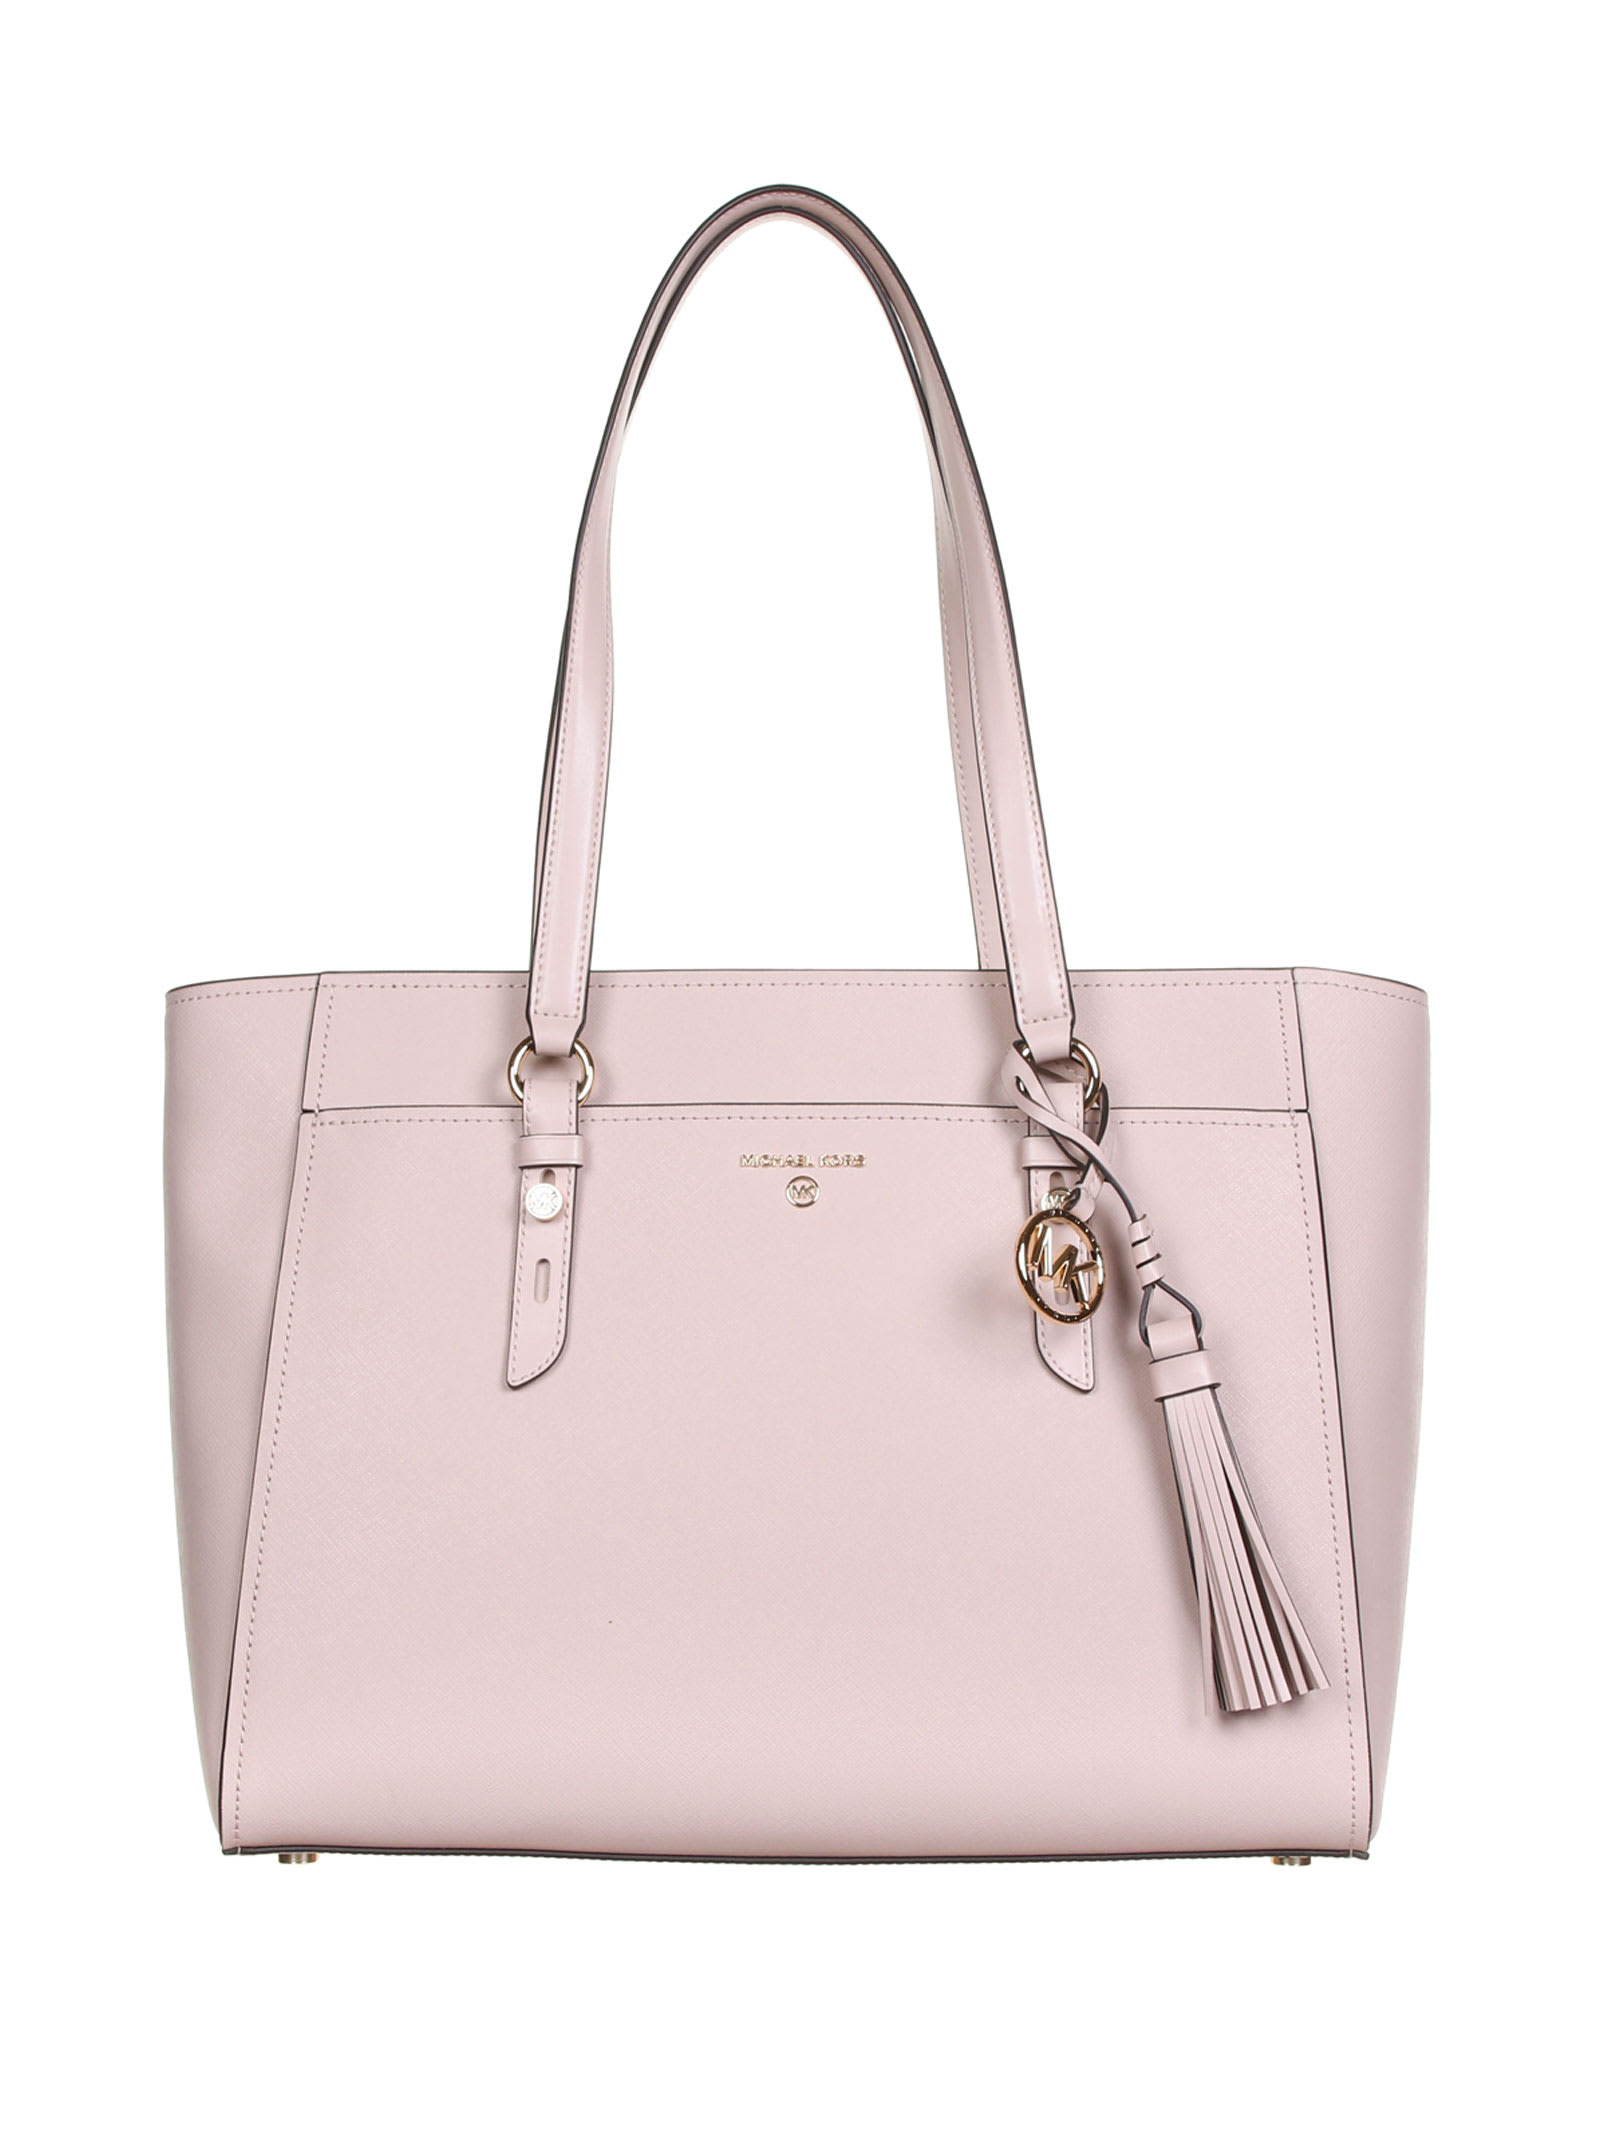 Michael Kors Tote Bag In Soft Pink Leather